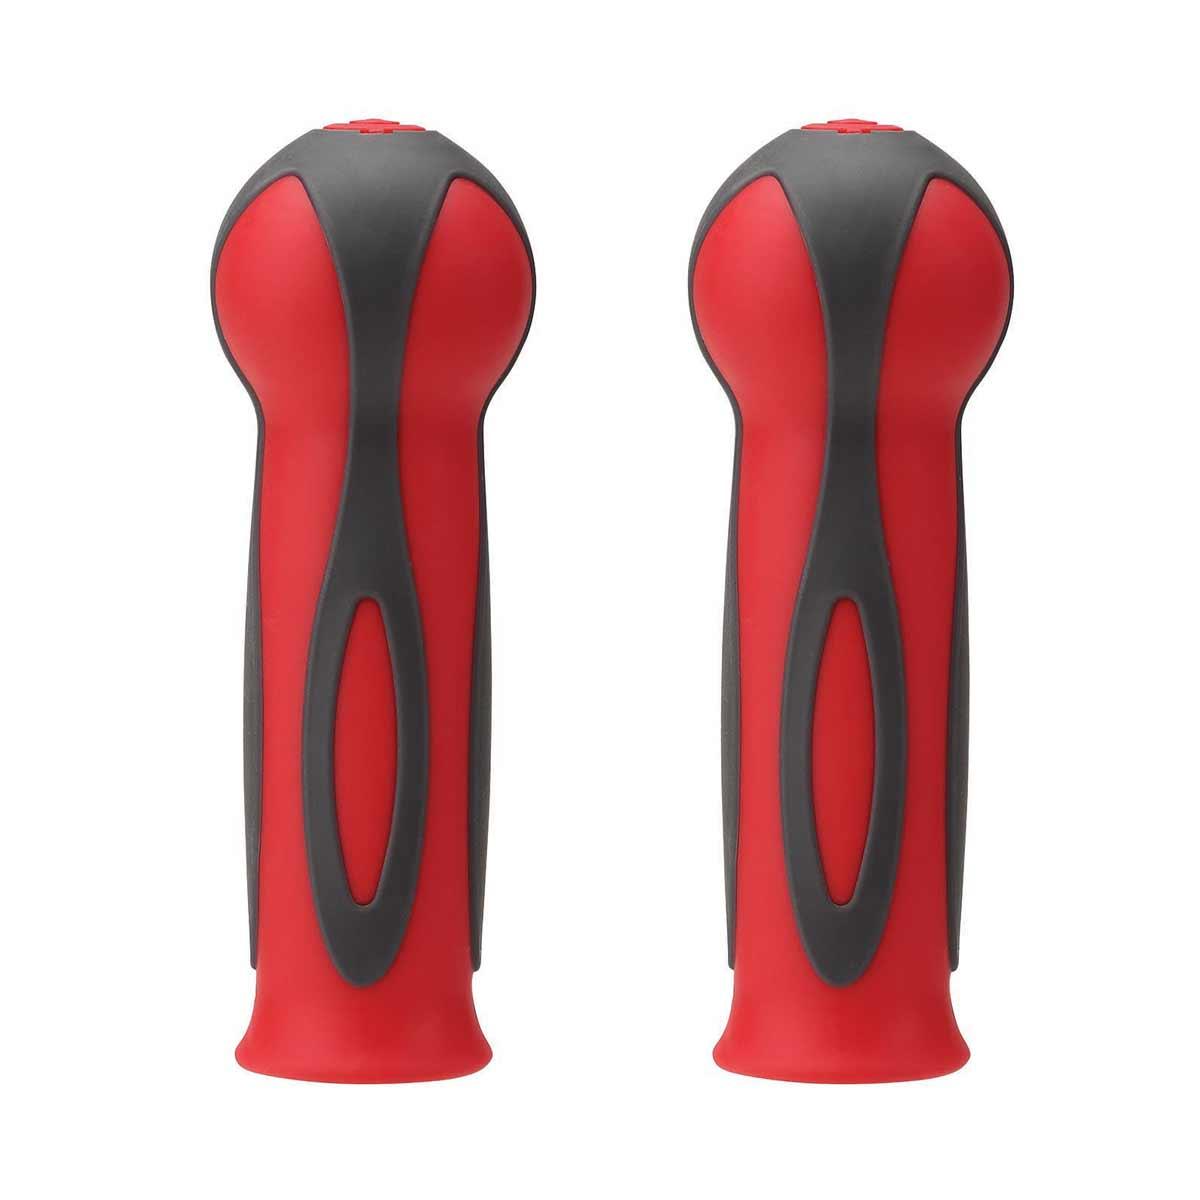 Spare parts: Scooter Handlebar Grips - set of 2 red - MoonyBoon